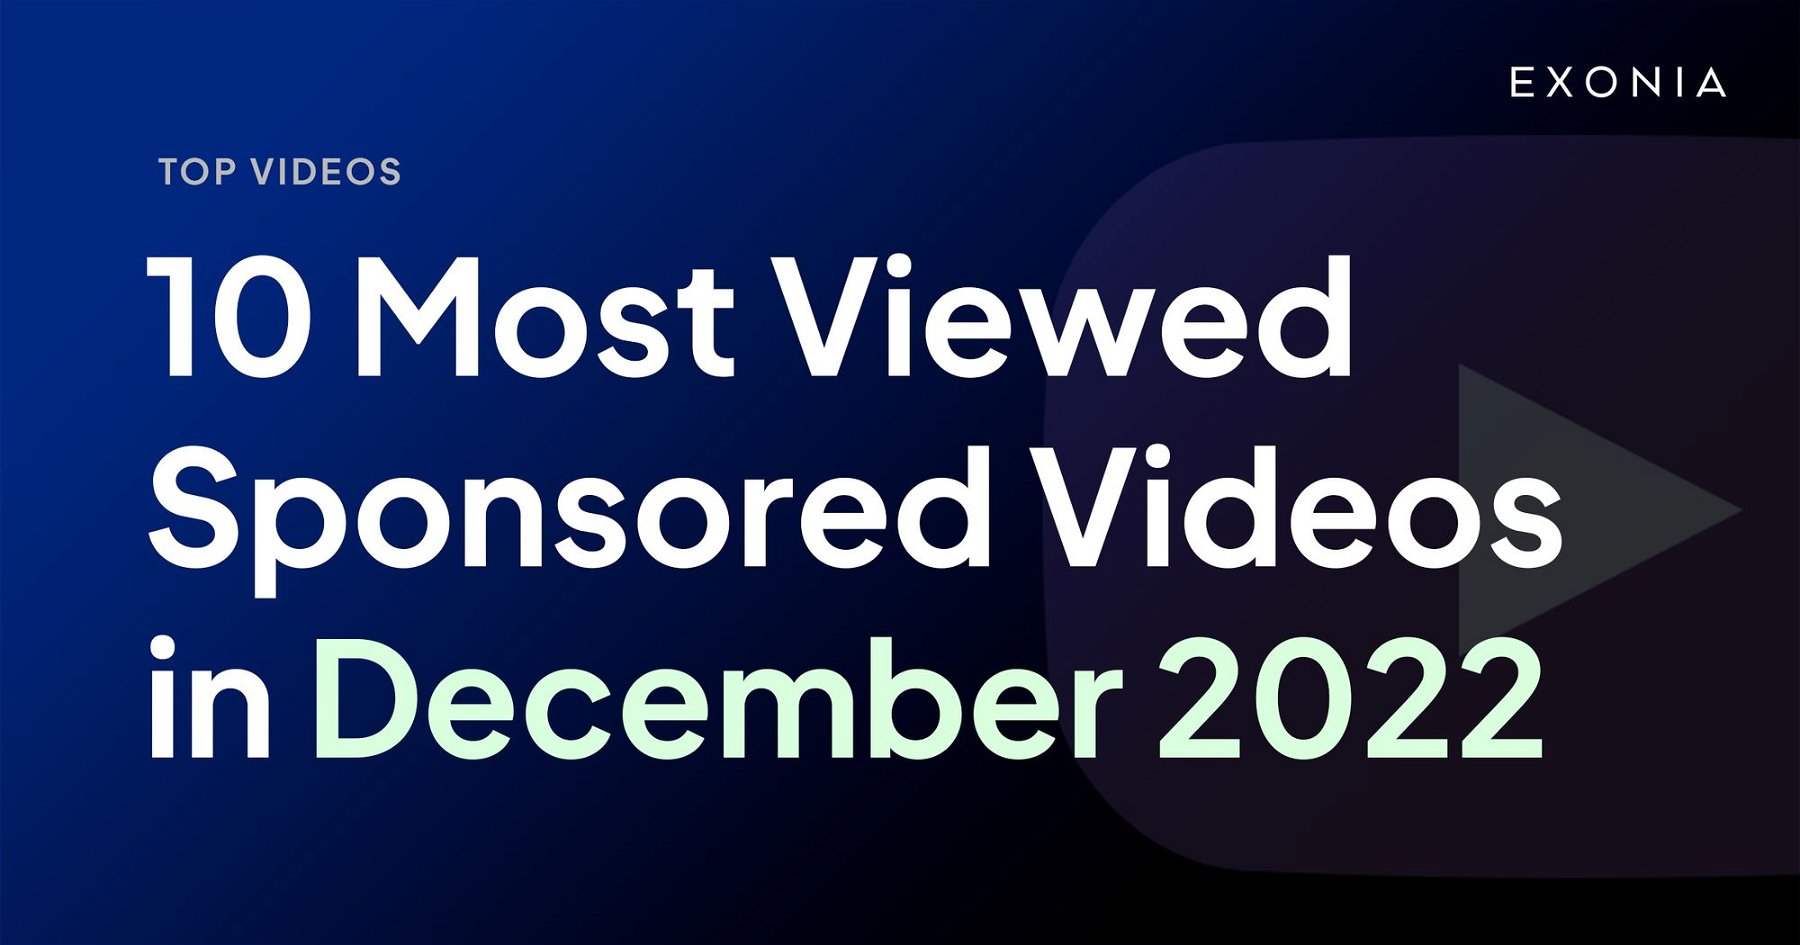 10 Most Viewed Sponsored YouTube Videos in December 2022